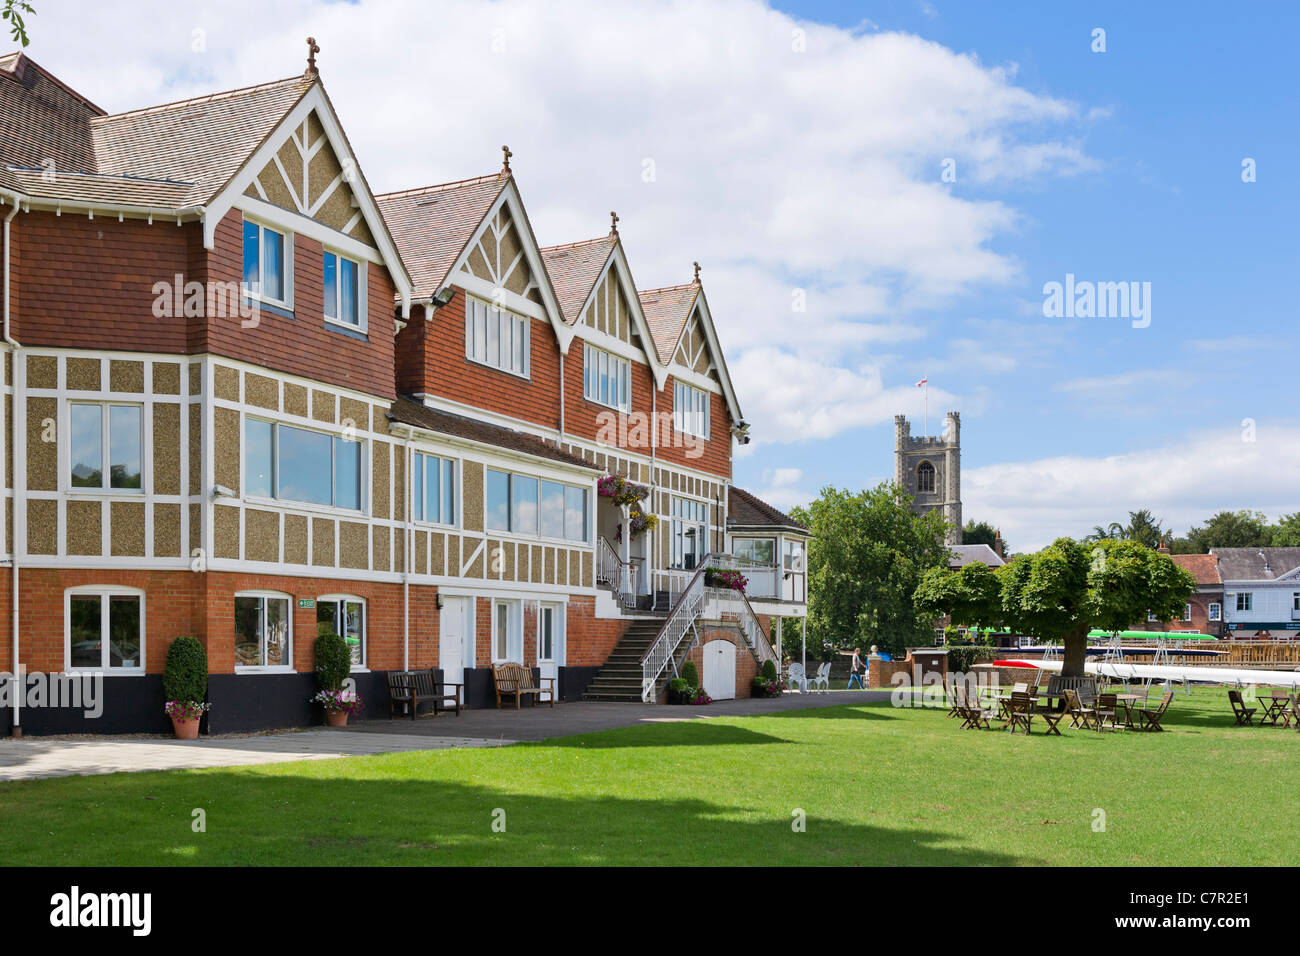 The famous Leander Rowing Club on the River Thames at Henley-on-Thames, Oxfordshire, England, UK Stock Photo